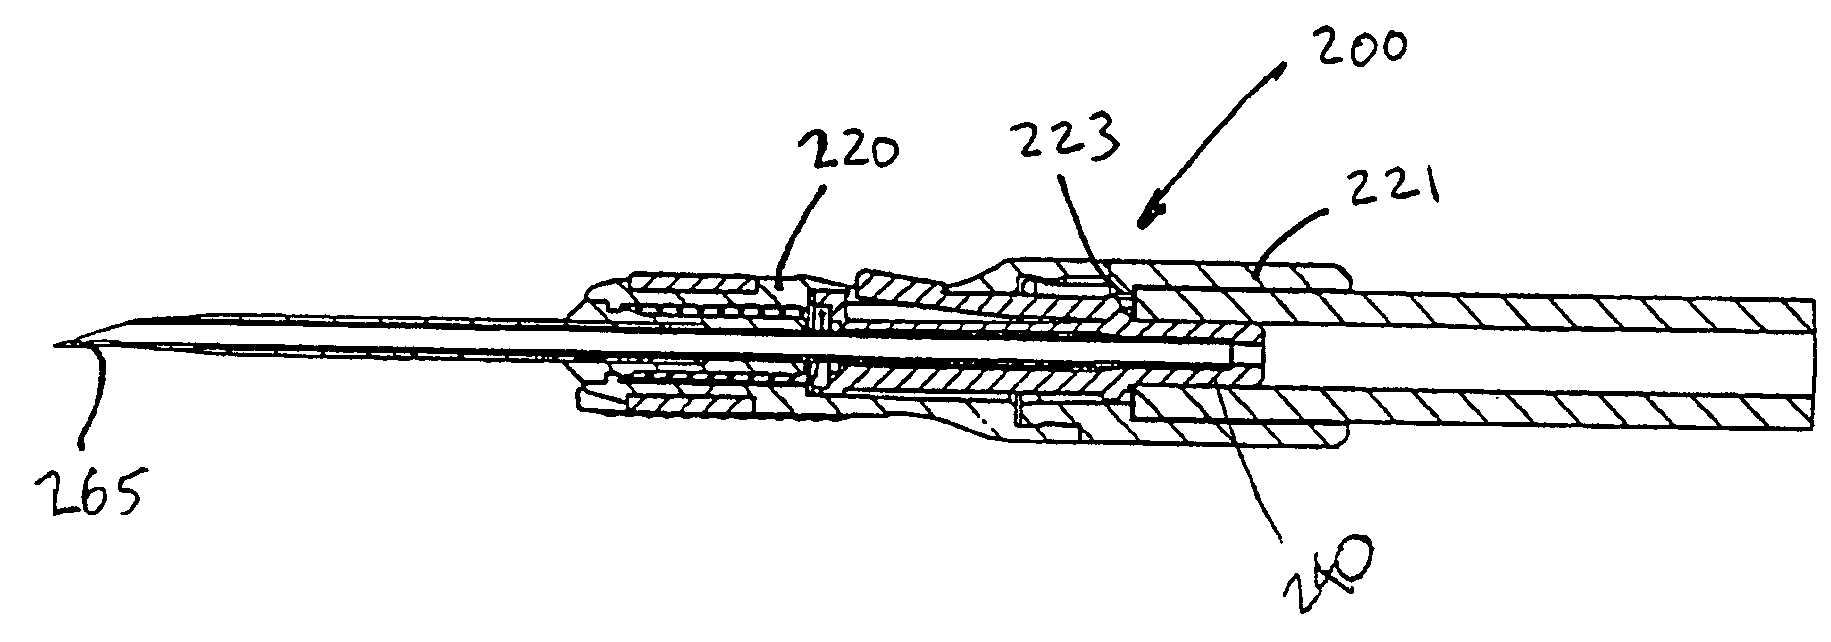 Medical device with shield having a retractable needle